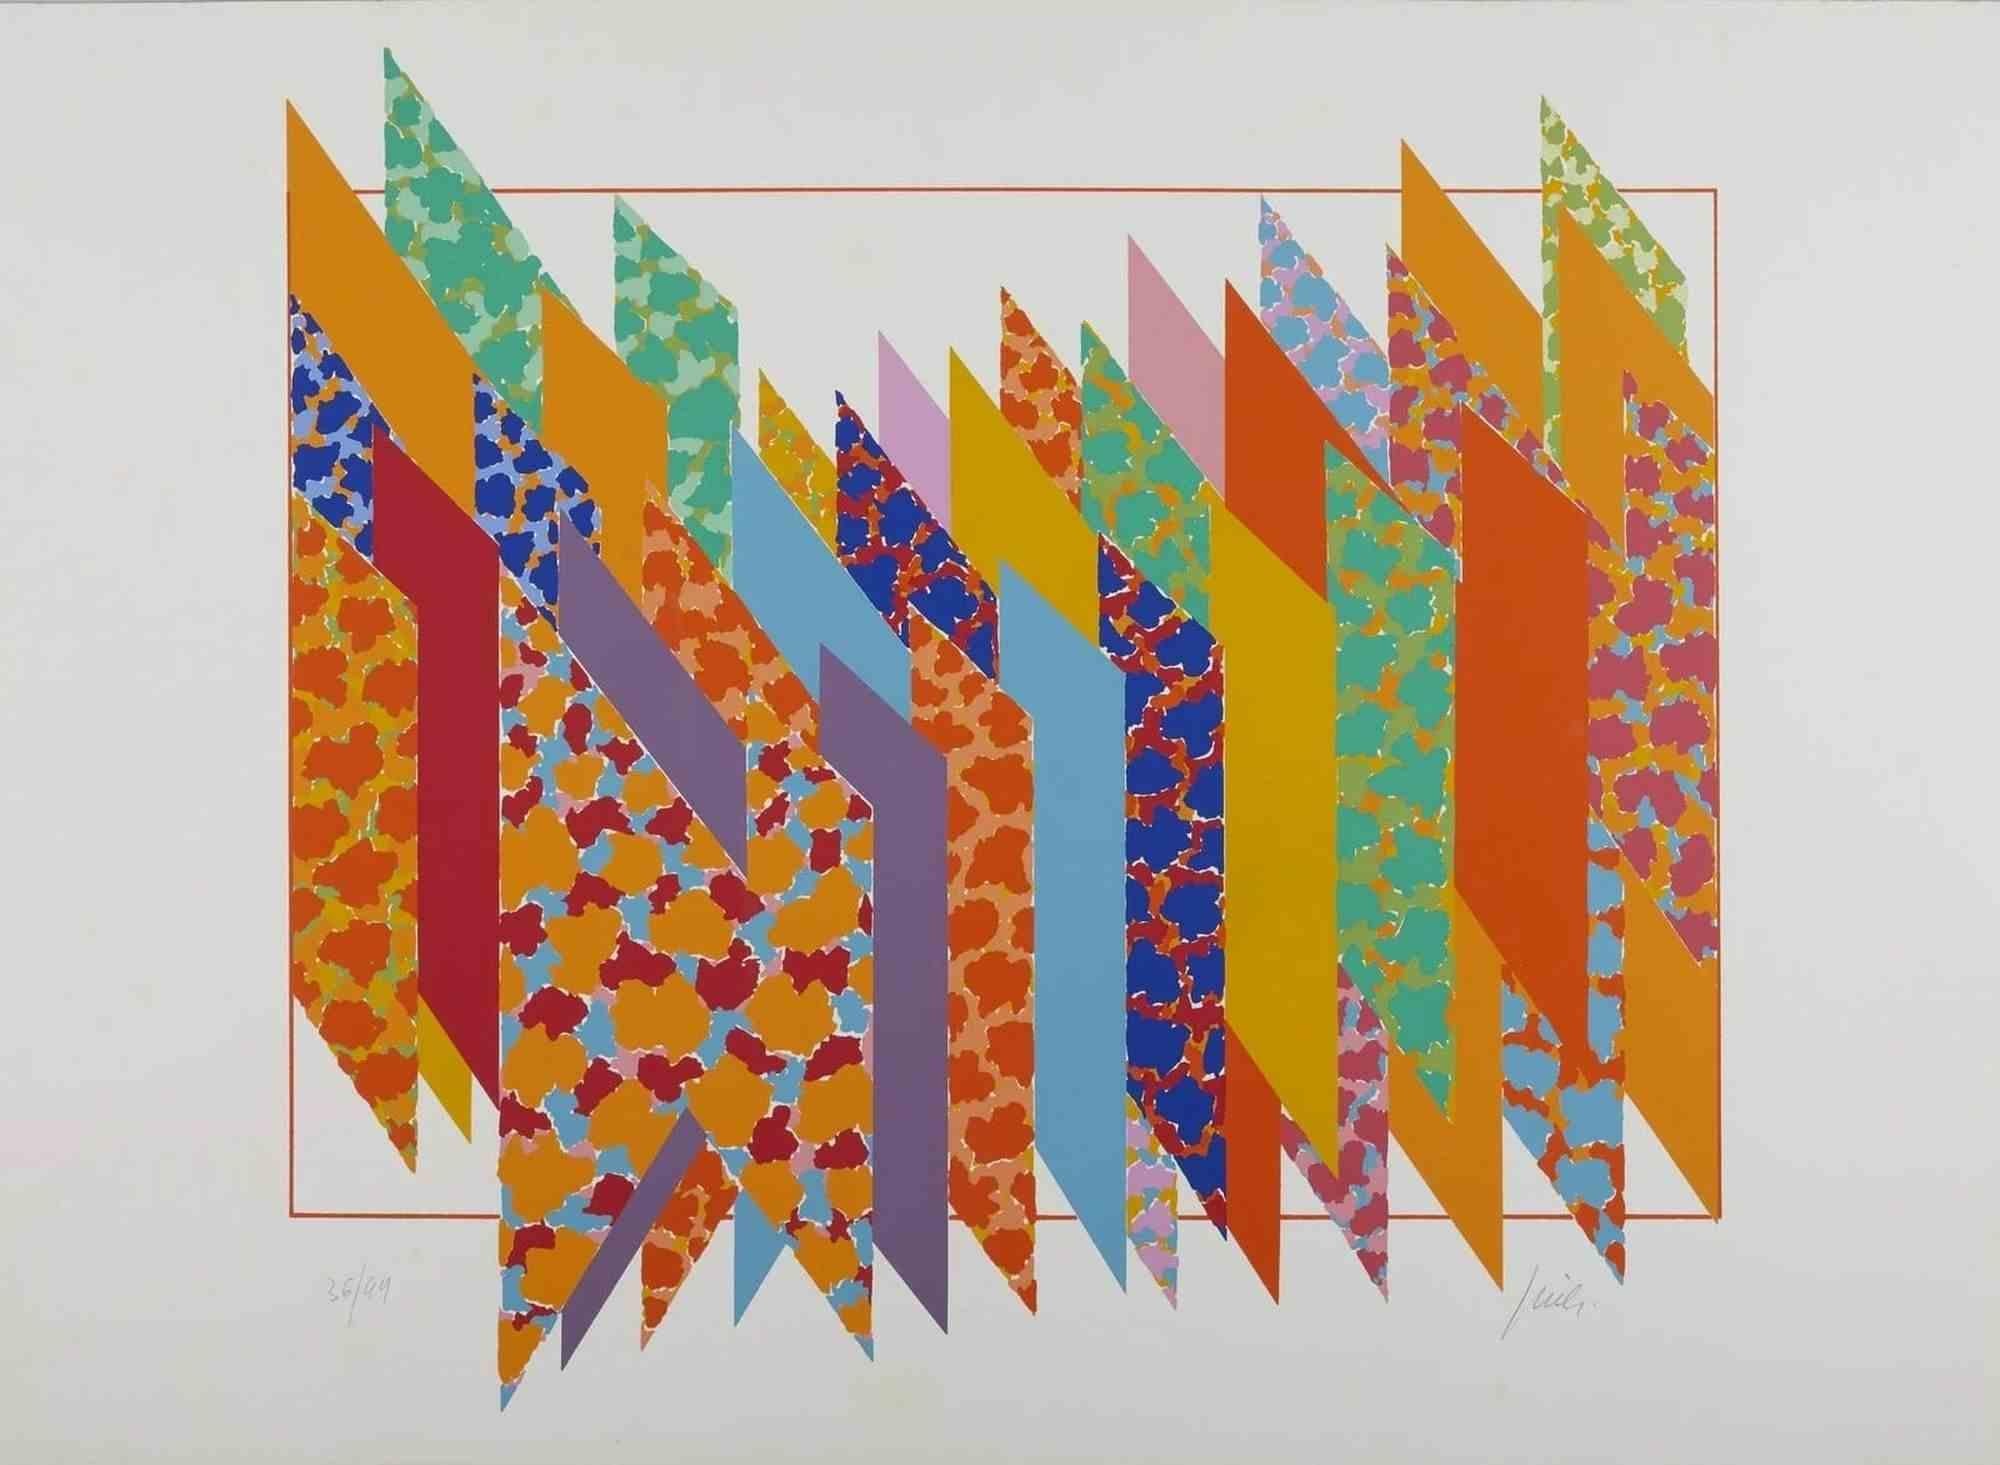 Untitled is an artwork realized by Franco Giuli, in 1970s. 

Screen print, 70 x 50 cm.

Edition, 36/99.

Hand signed lower right margin.

Good conditions